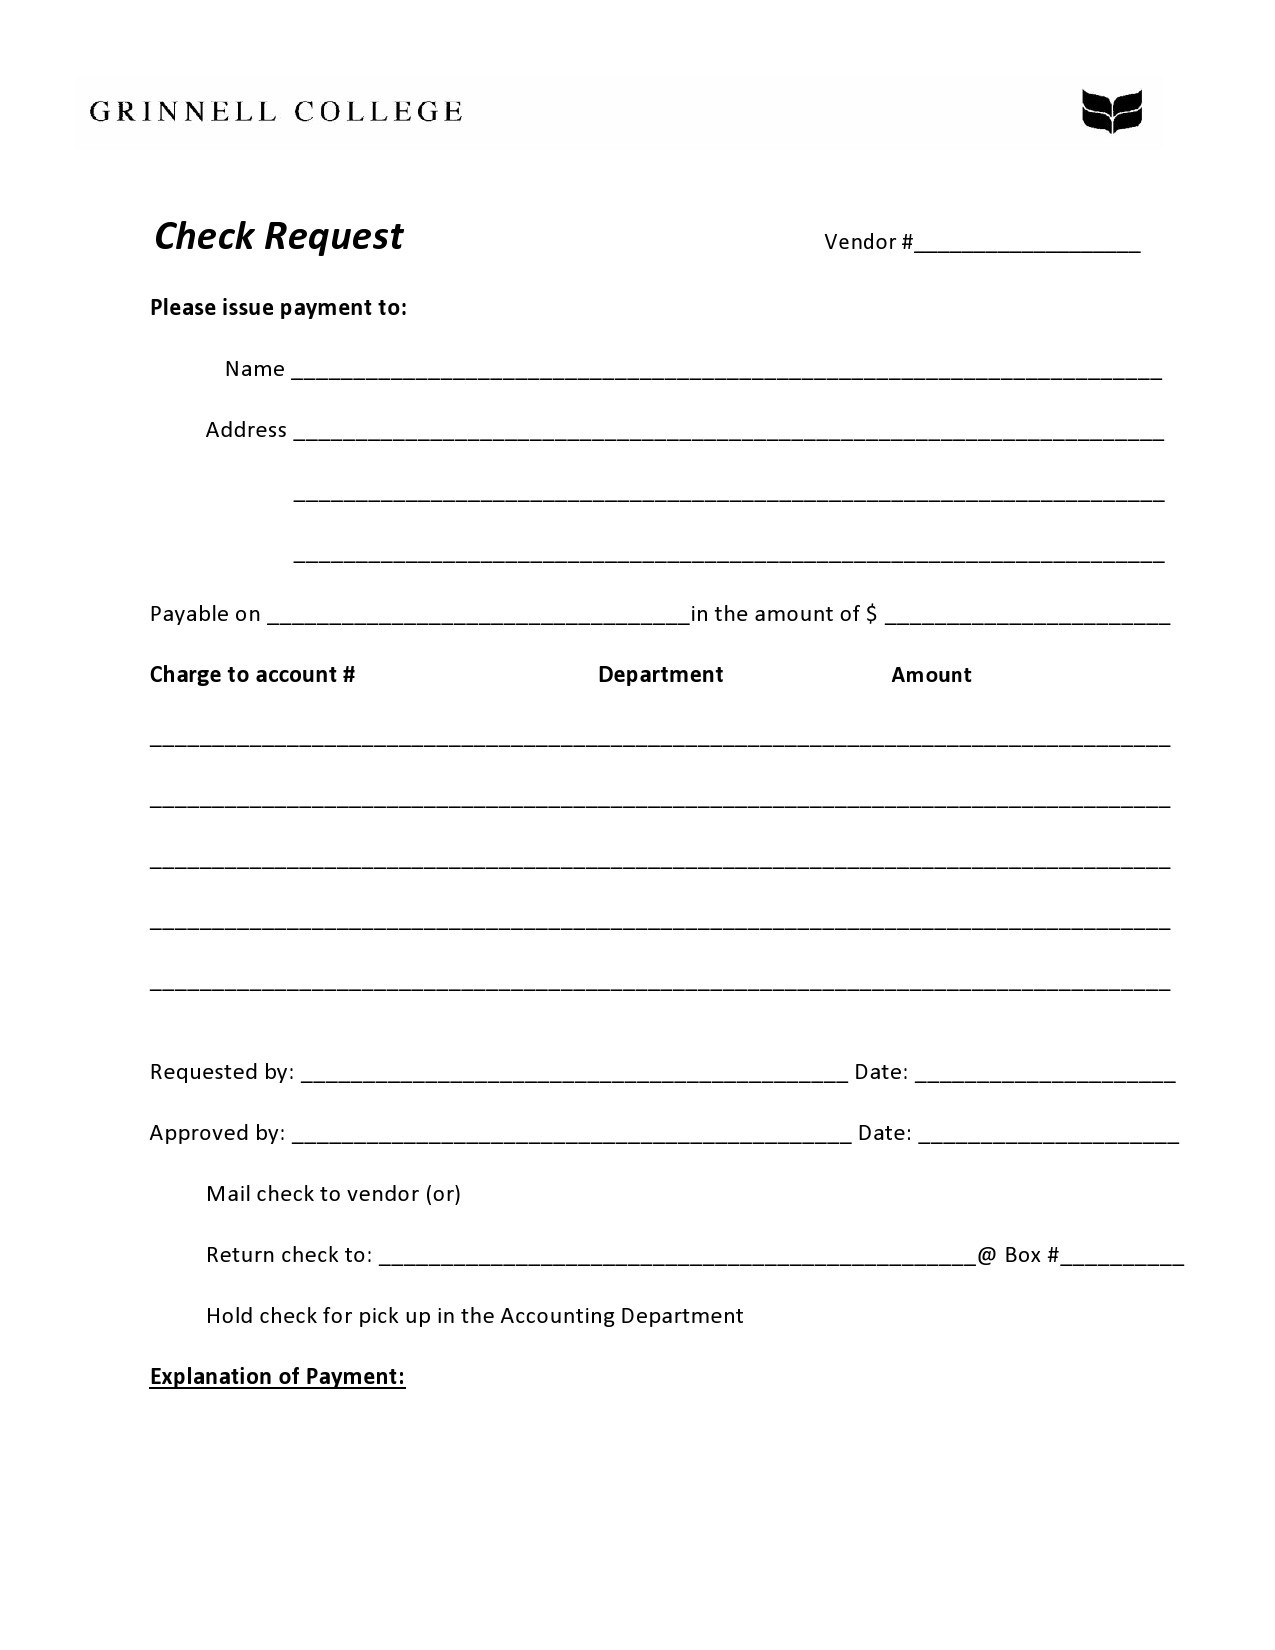 Cheque Requisition Form Template Word Inside Check Request Template Word